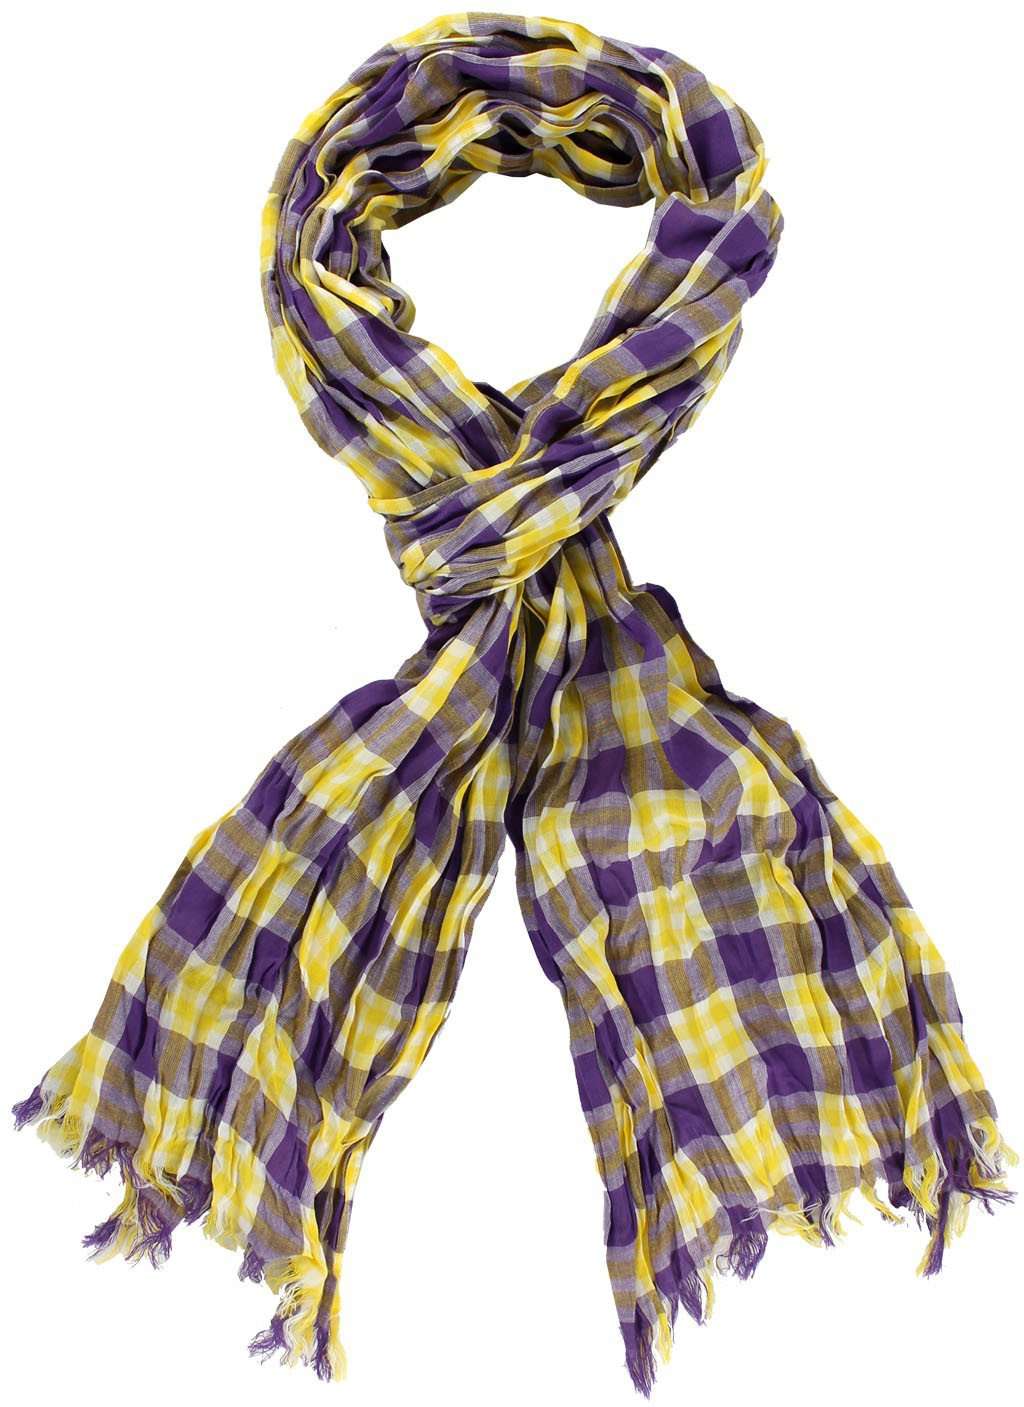 Scarf in Purple and Gold Madras by Olde School Brand - Country Club Prep